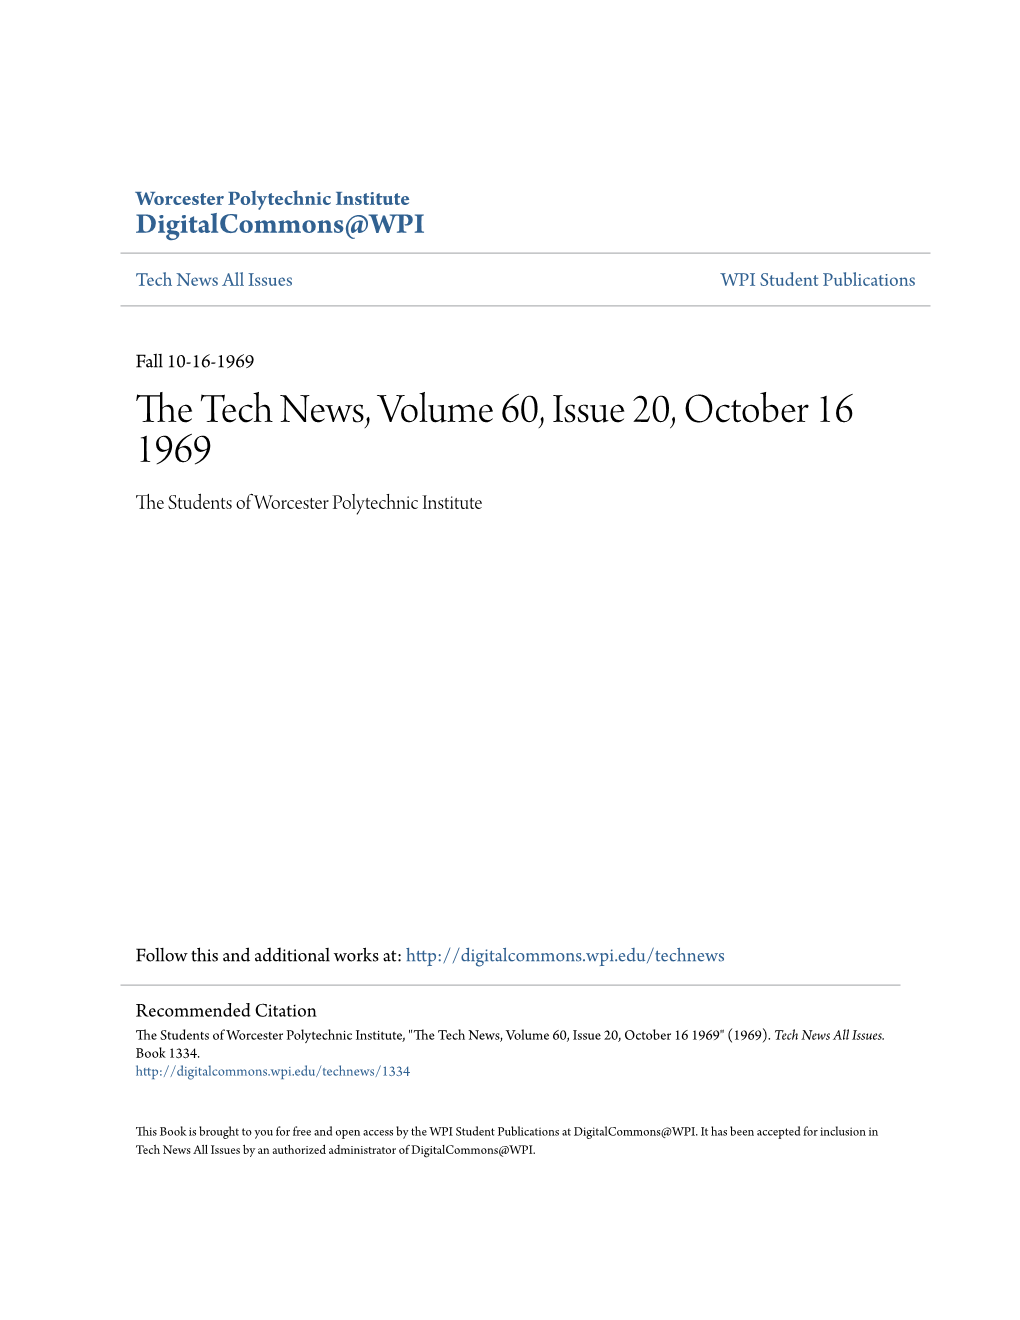 The Tech News, Volume 60, Issue 20, October 16 1969